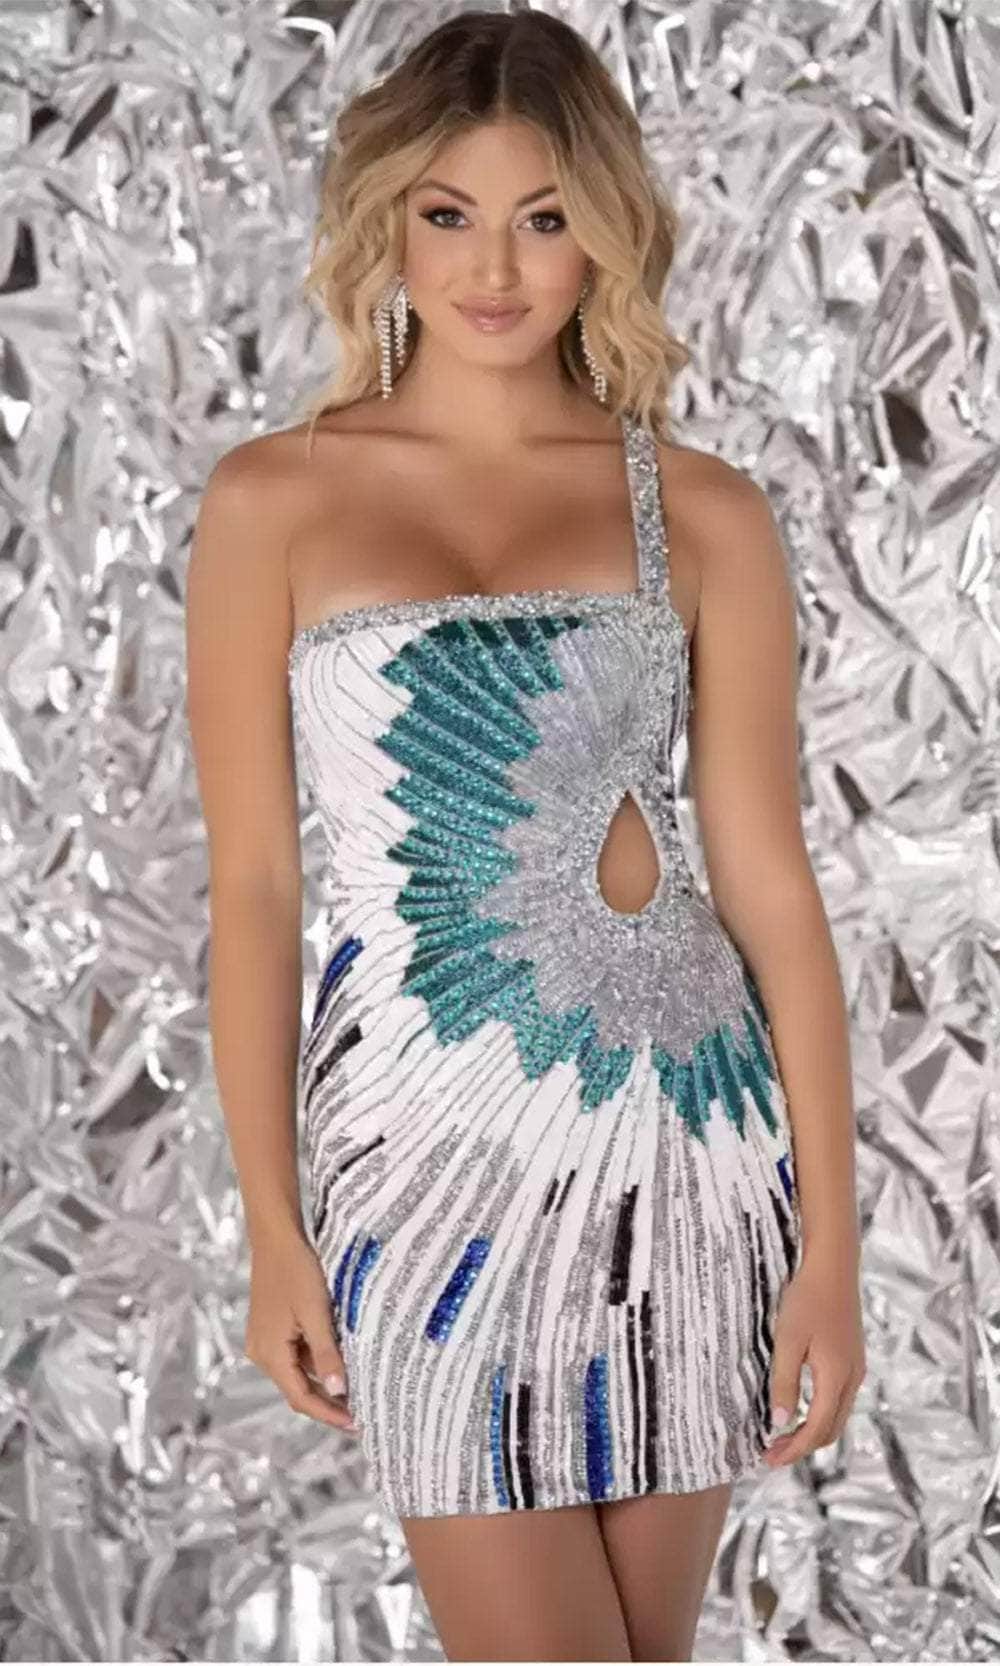 Image of Aleta Couture 1068 - Beaded Cutout Cocktail Dress